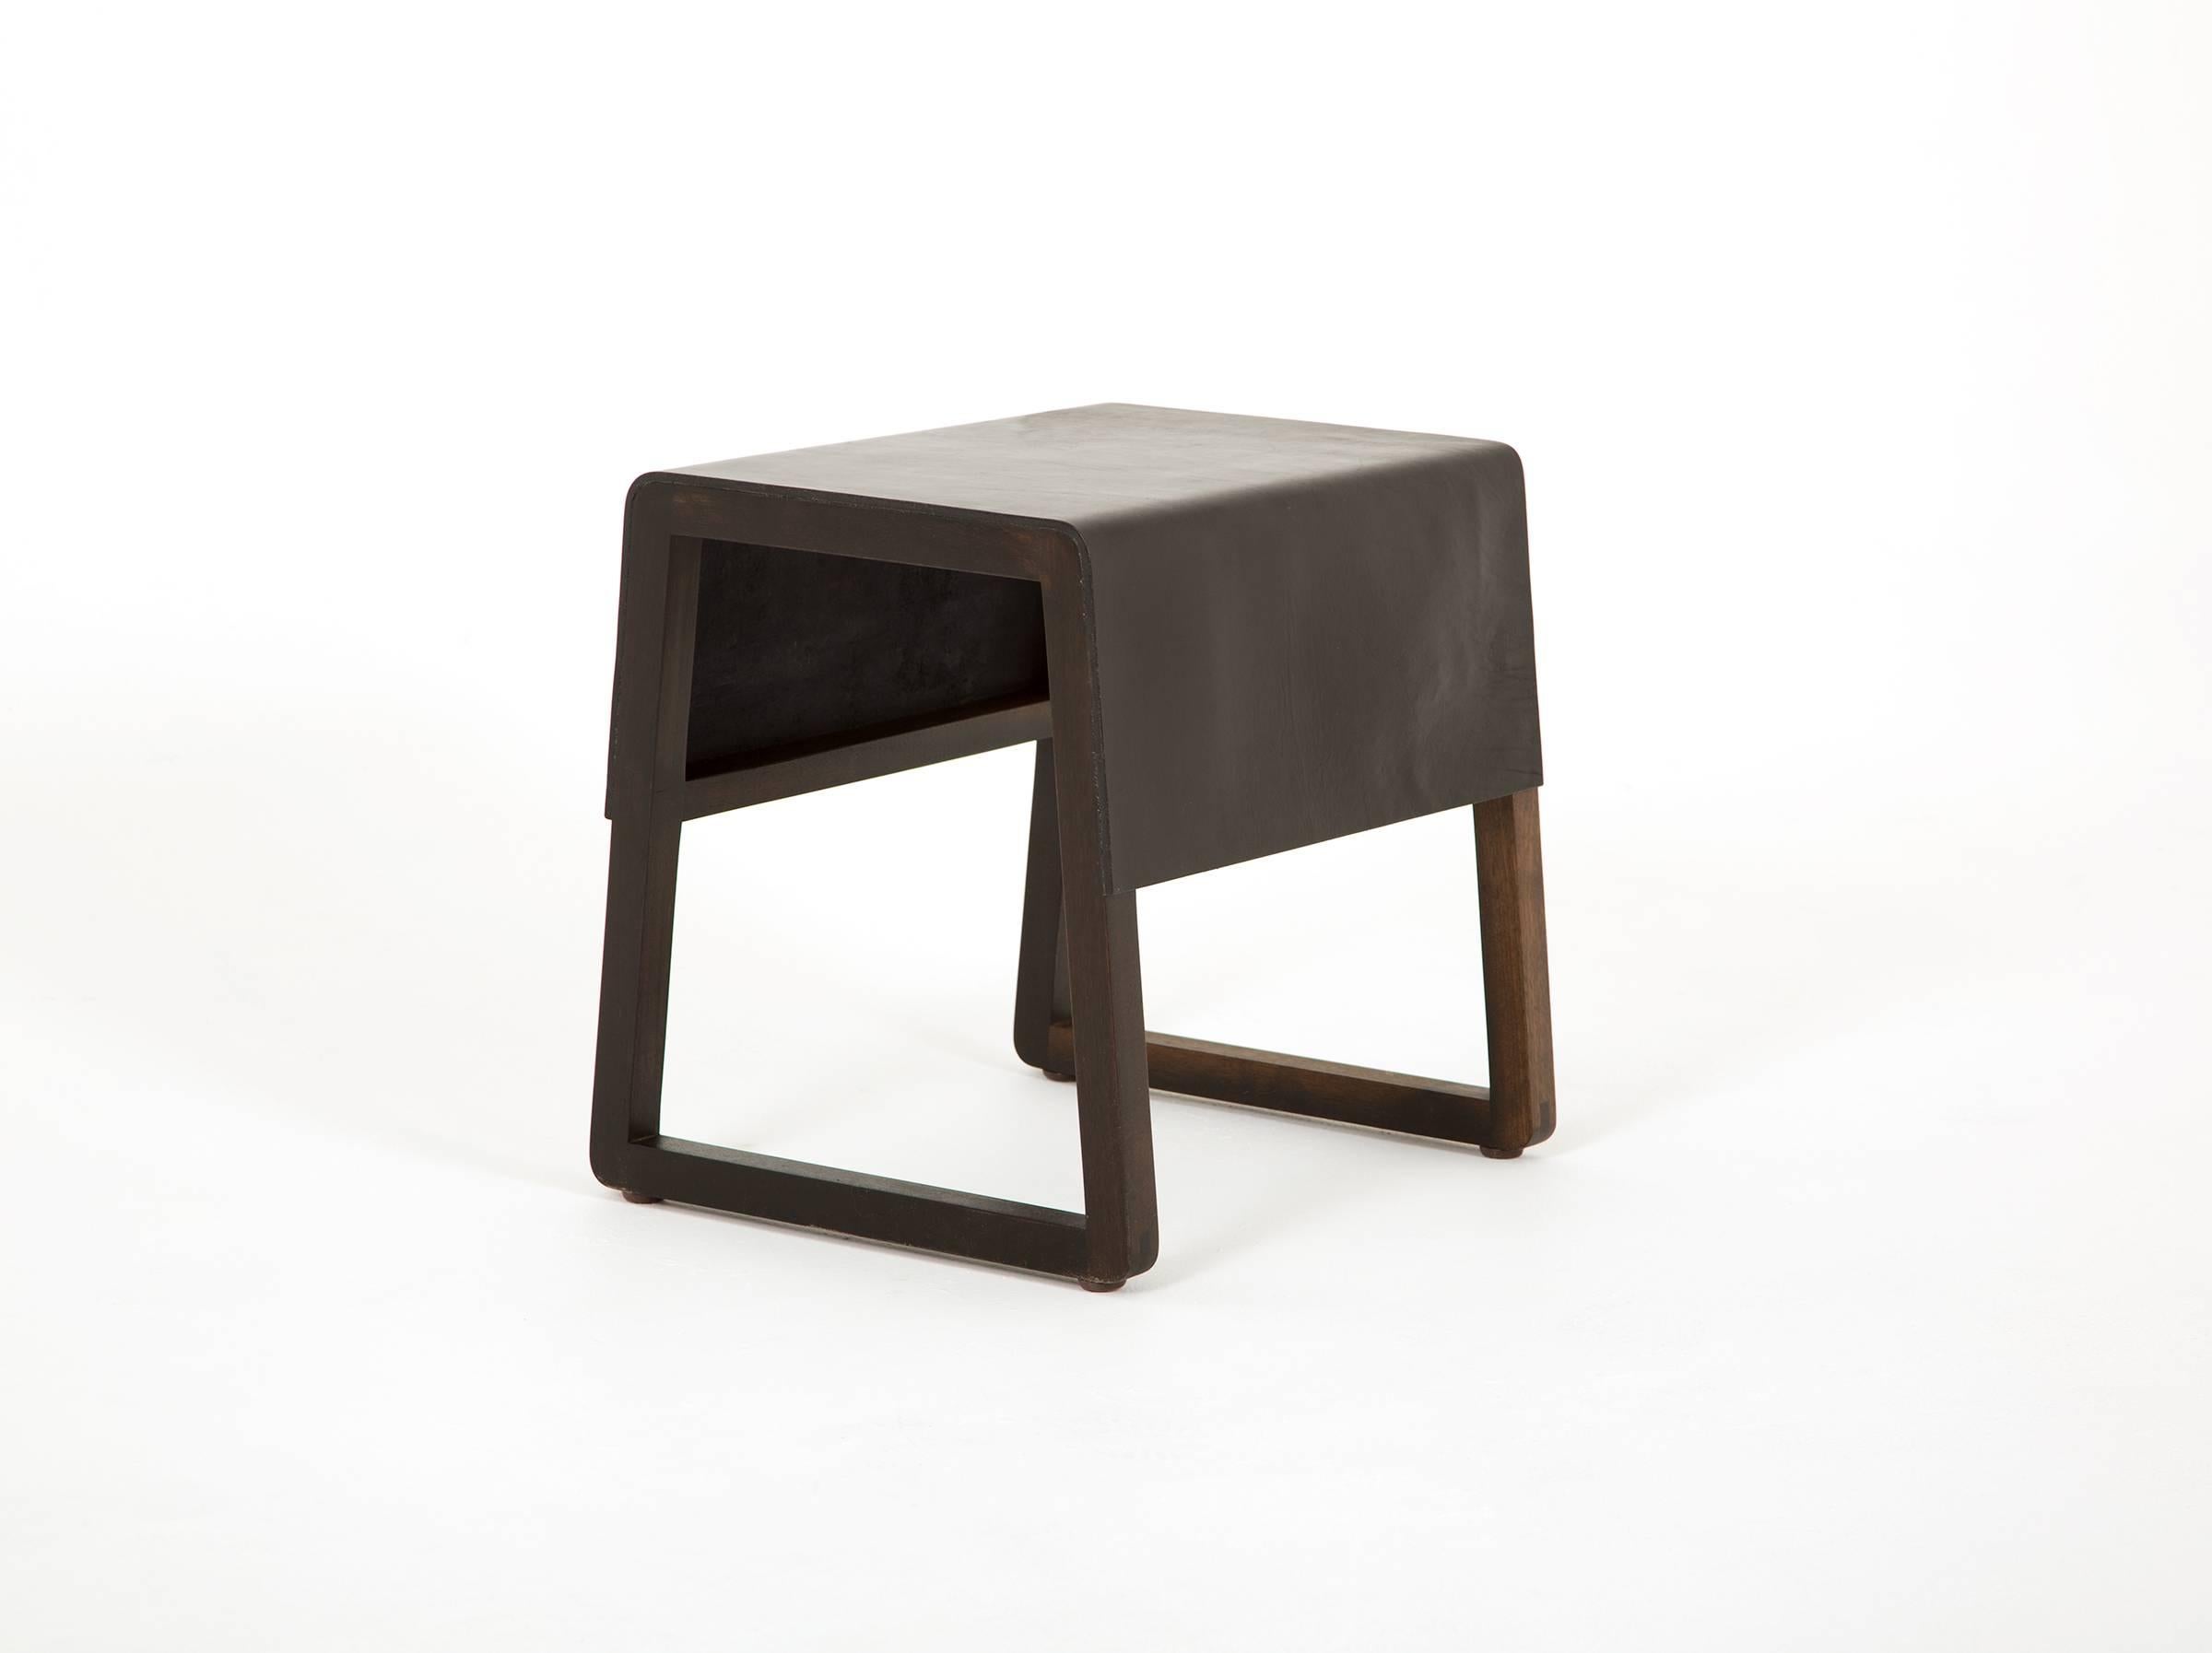 Leather top low stool.

Made of oxidized walnut oak and black vegetable tanned leather.

Designed and built by Max Greenberg for Works Progress. 

Underside labeled with the Works Progress logo.

Other wood selections or additional stools